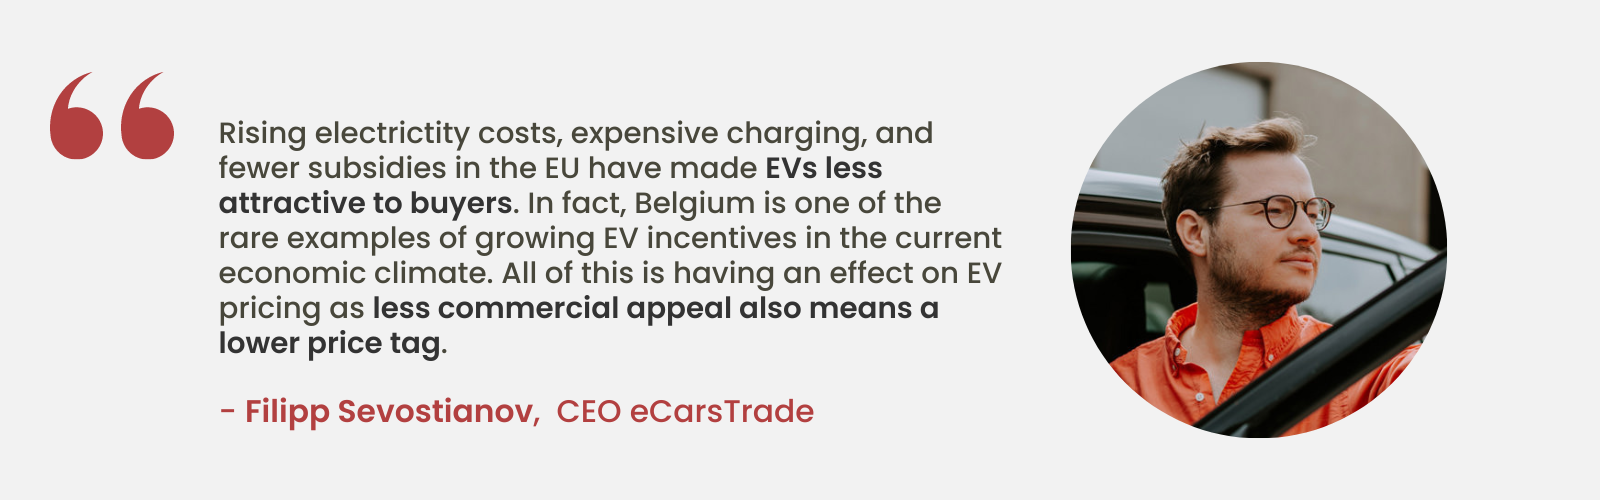 Expert insight from Filipp Sevostianov, CEO of eCarsTrade, on the decreasing appeal of EVs due to rising costs and fewer subsidies in the EU, highlighting Belgium's unique position with growing EV incentives.